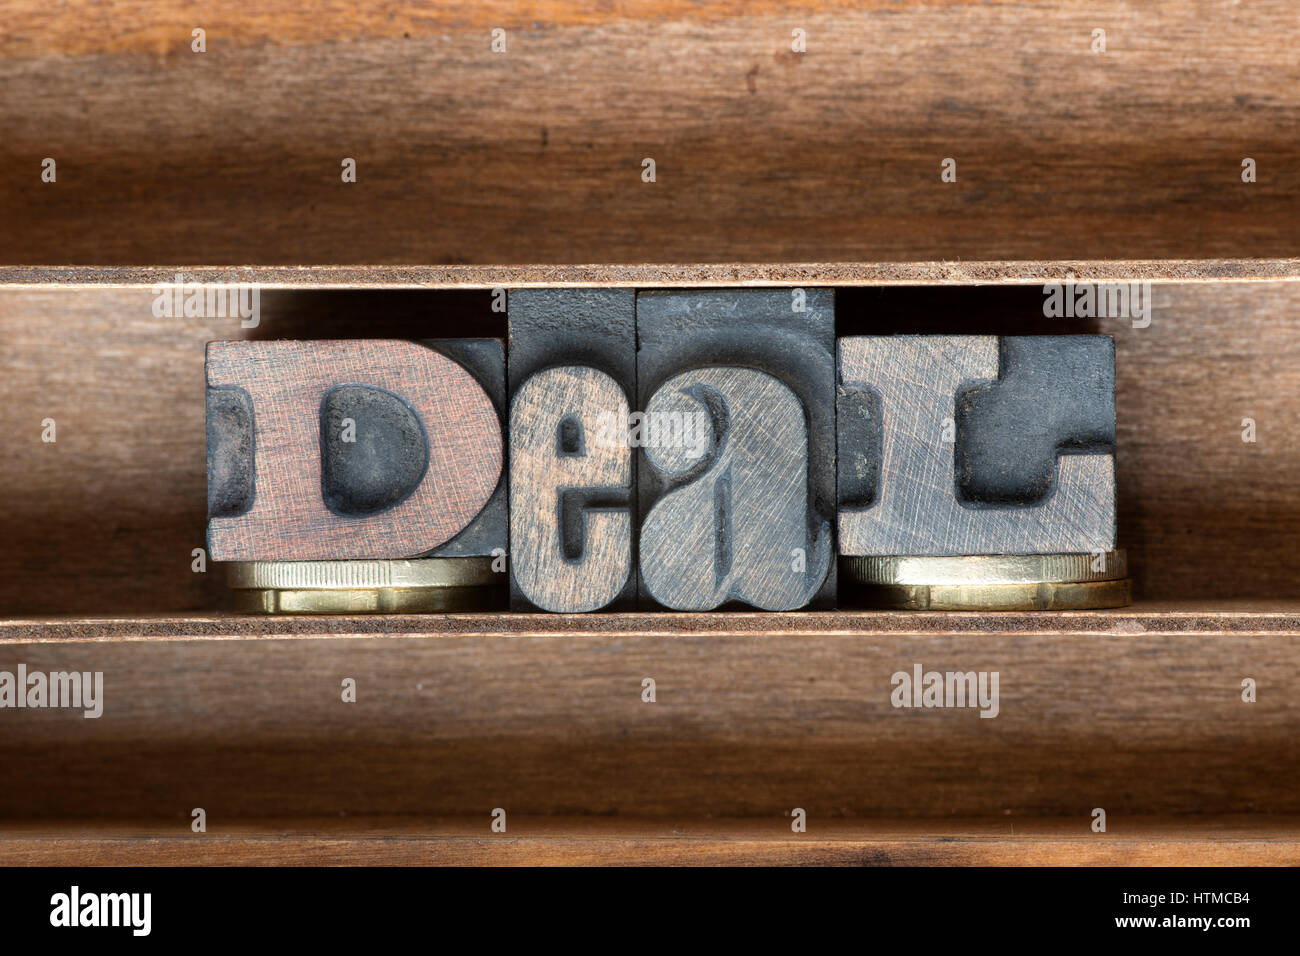 deal word made from vintage letterpress type on wooden tray Stock Photo